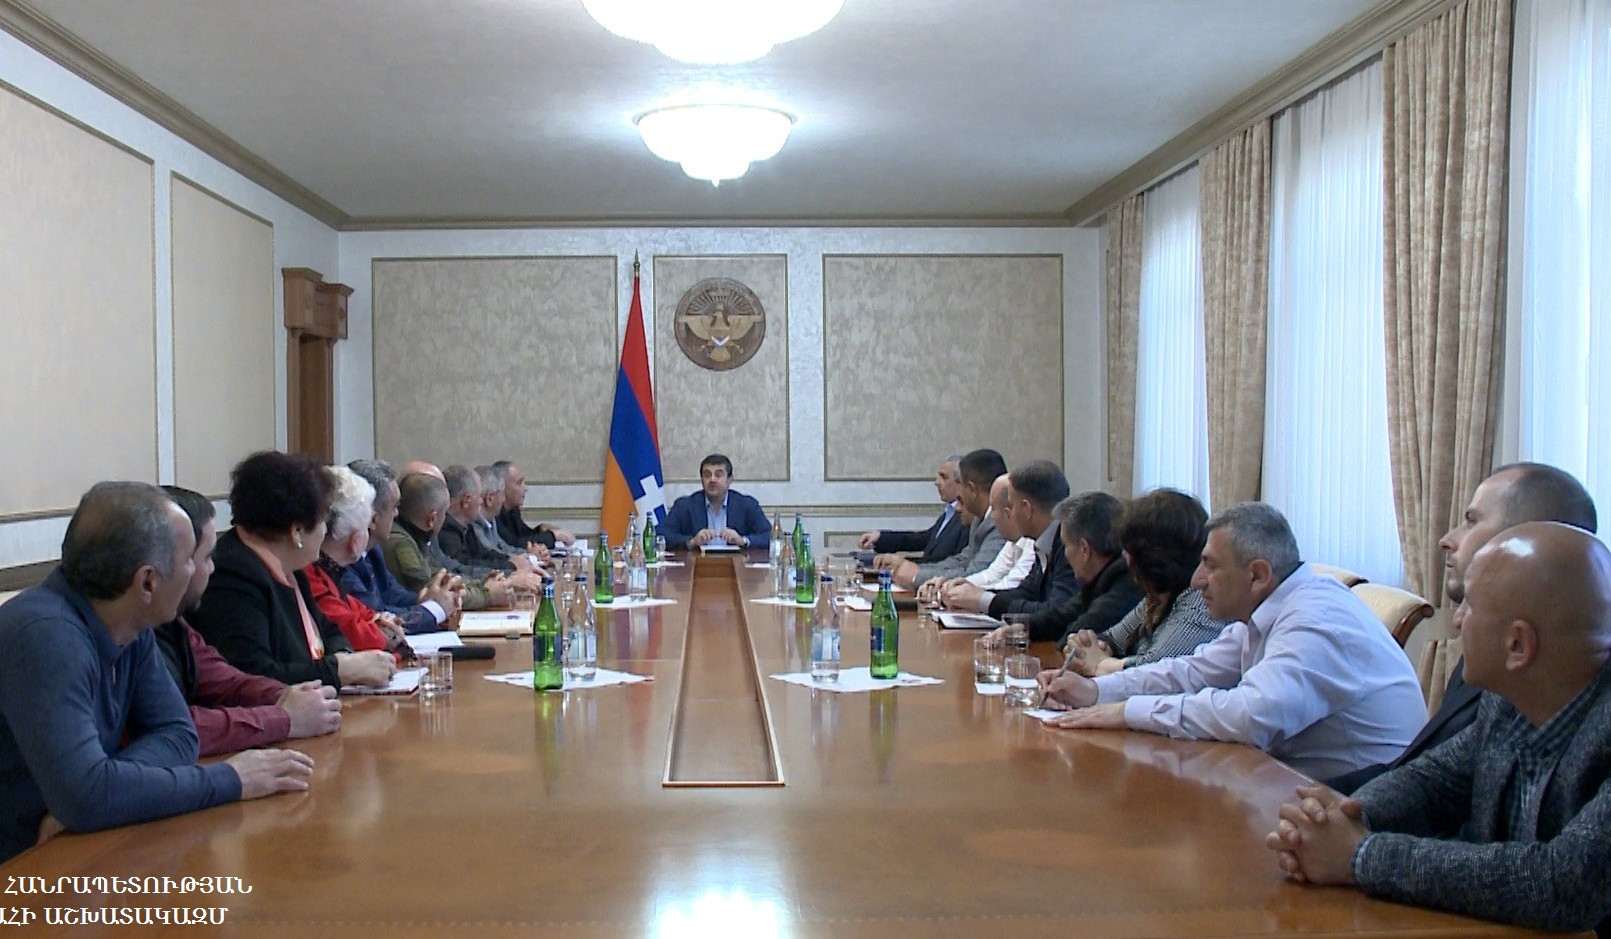 President of Artsakh discussed situation in republic with members of Public Council